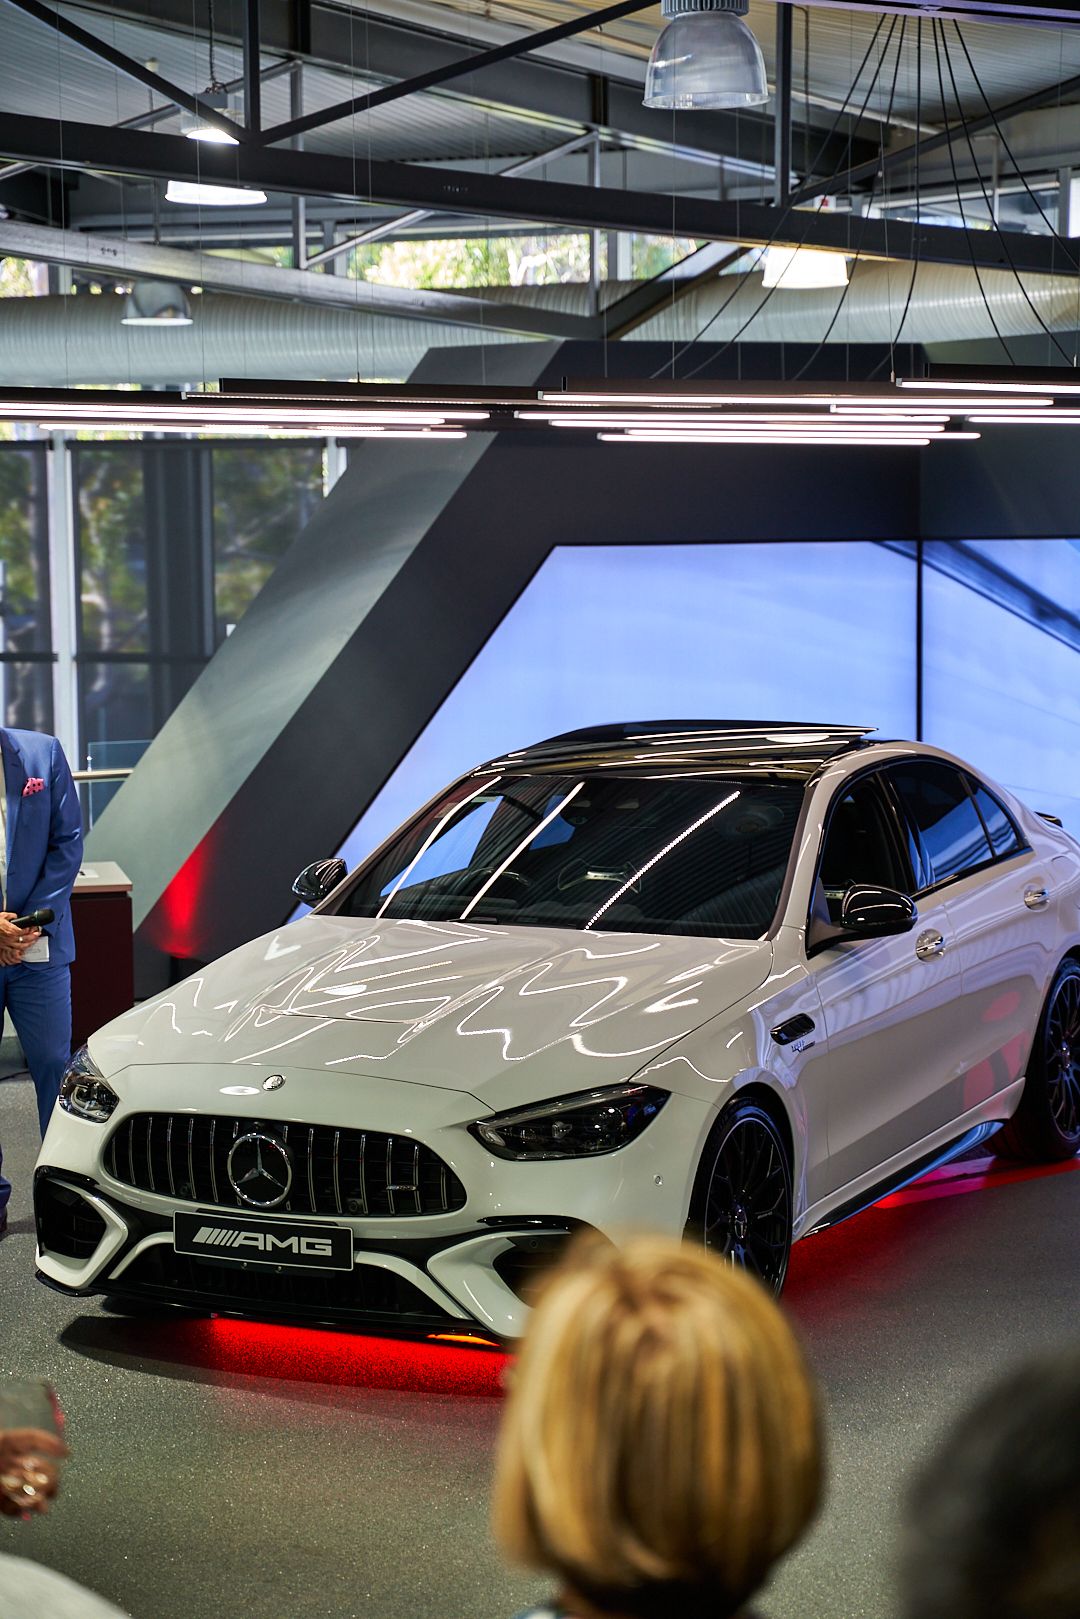 LSH Auto Melbourne unveils the high-performance Mercedes-AMG C 63 S E…with a little help from its friends